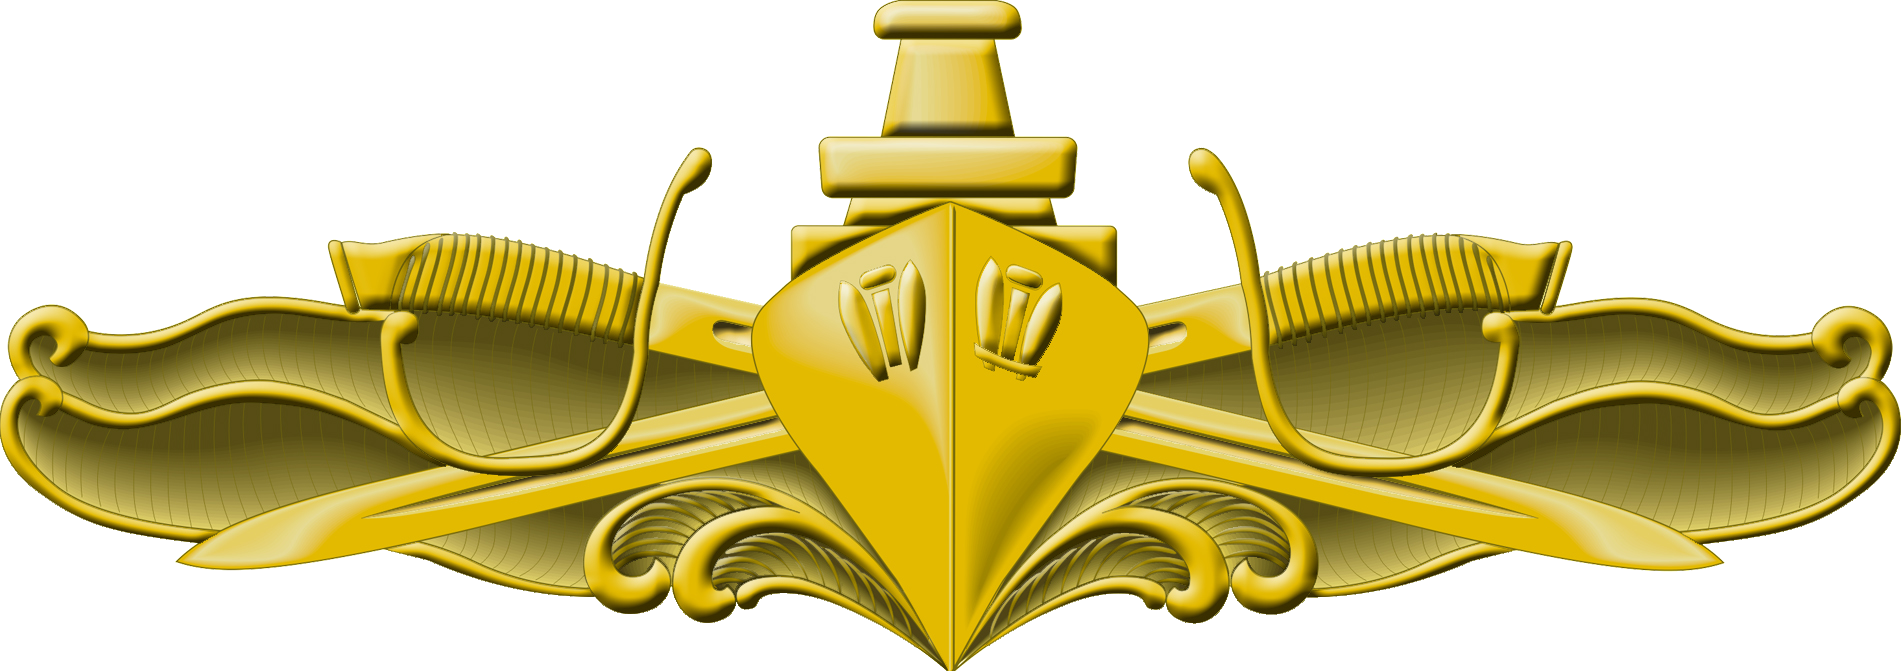 File Surface Warfare Officer Insignia Png Wikimedia Mons